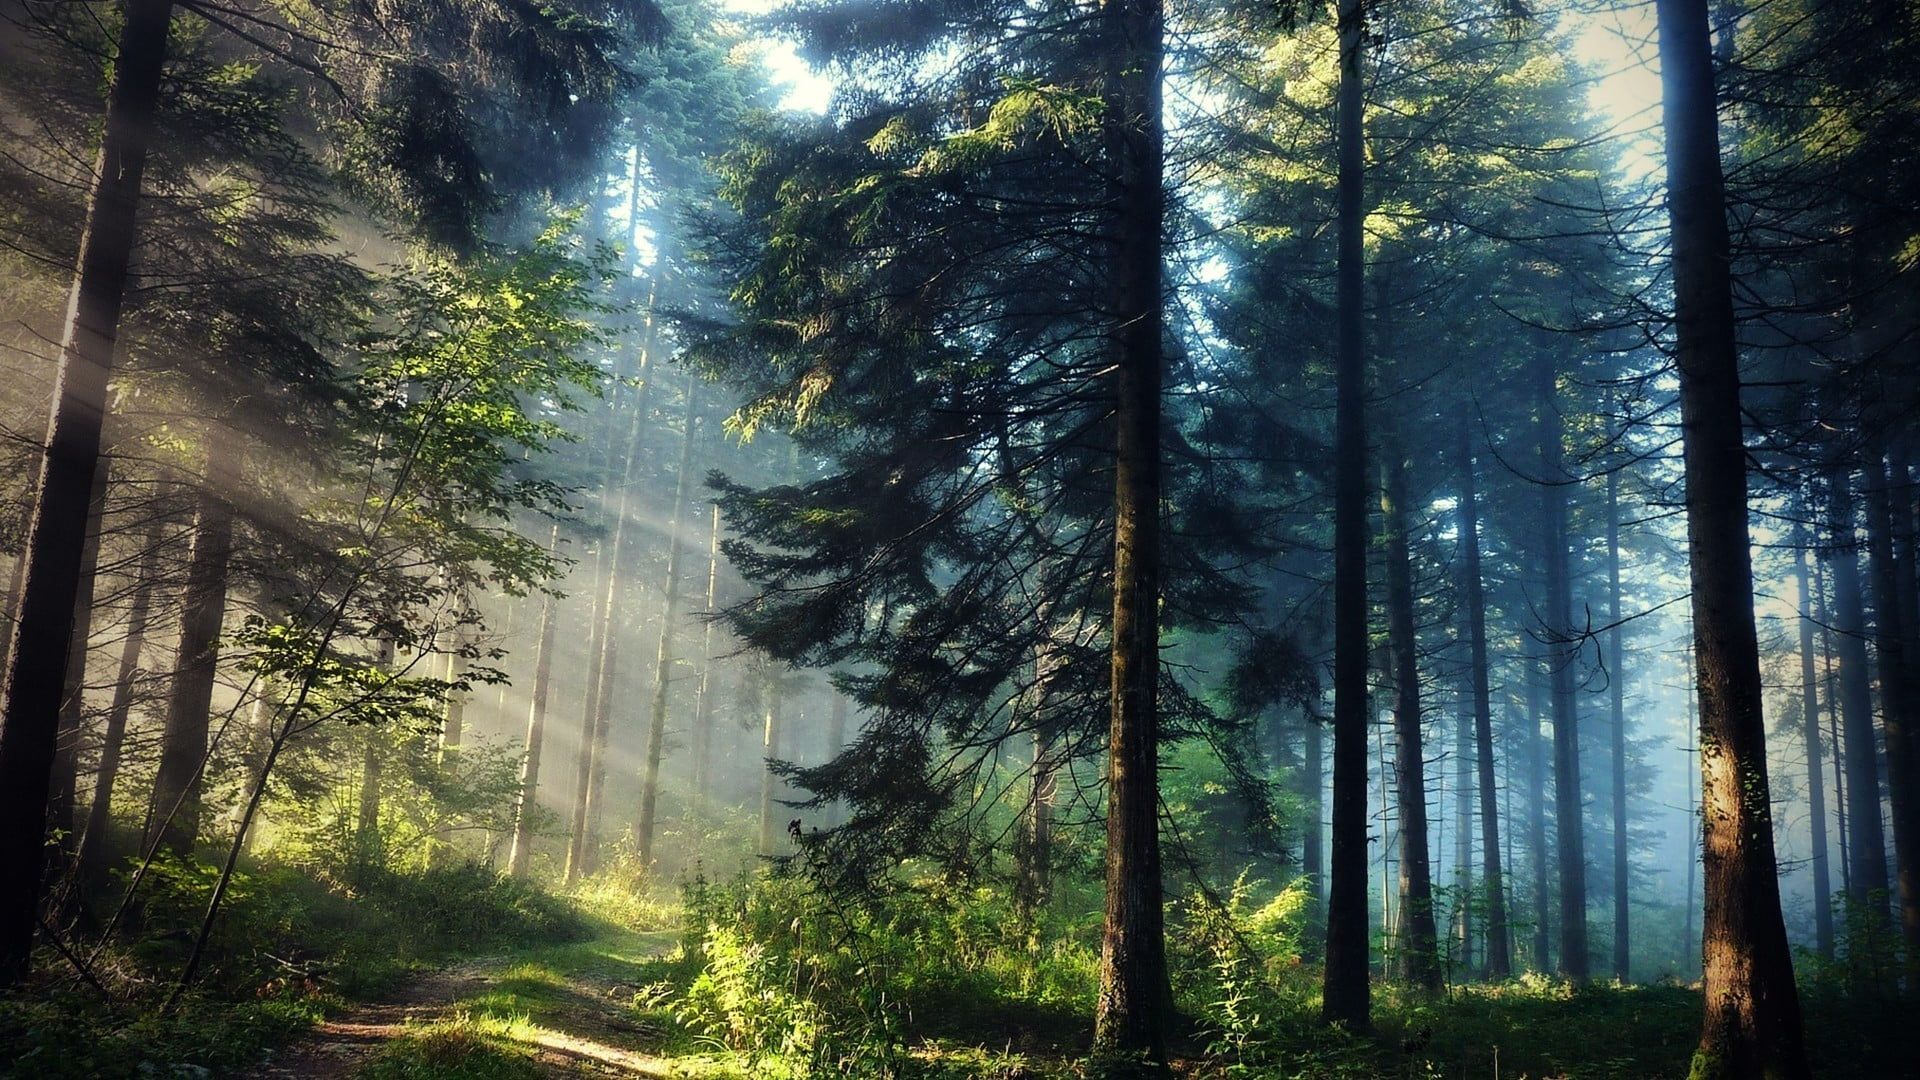 Green forest wallpaper, landscape photography of a forest, trees, sun rays. Landscape photography, Landscape photography nature, Forest wallpaper